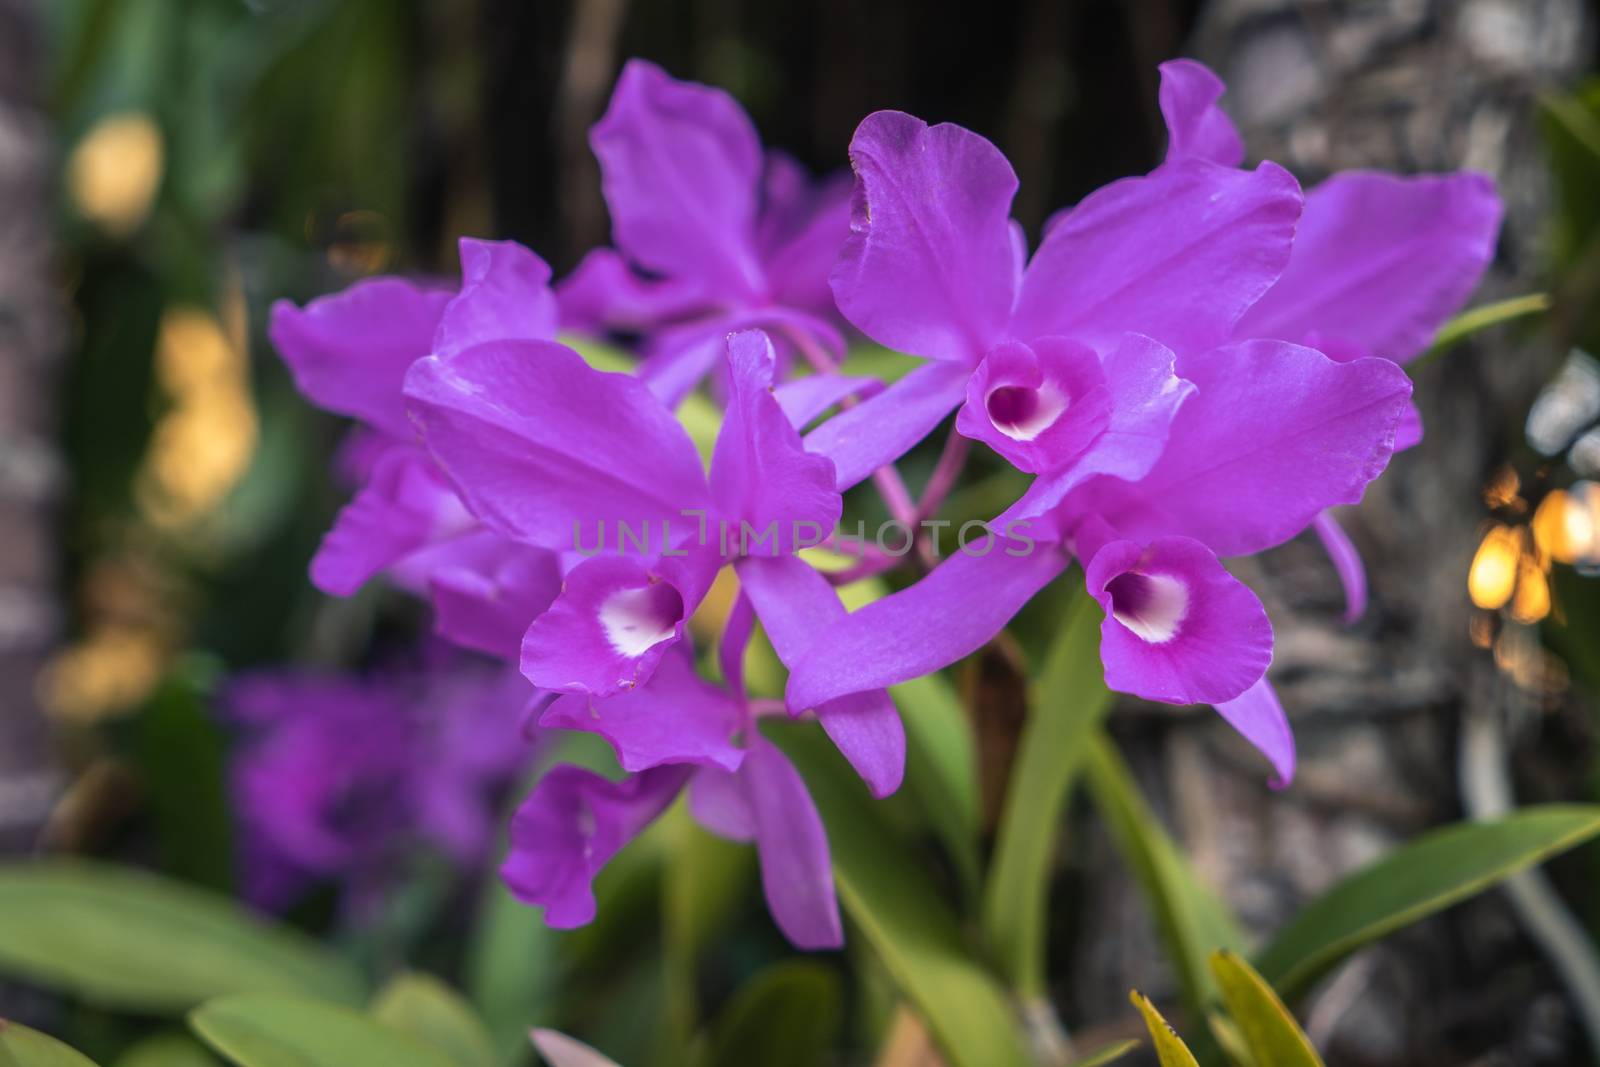 A photograph of a cluster of violet orchids flowers